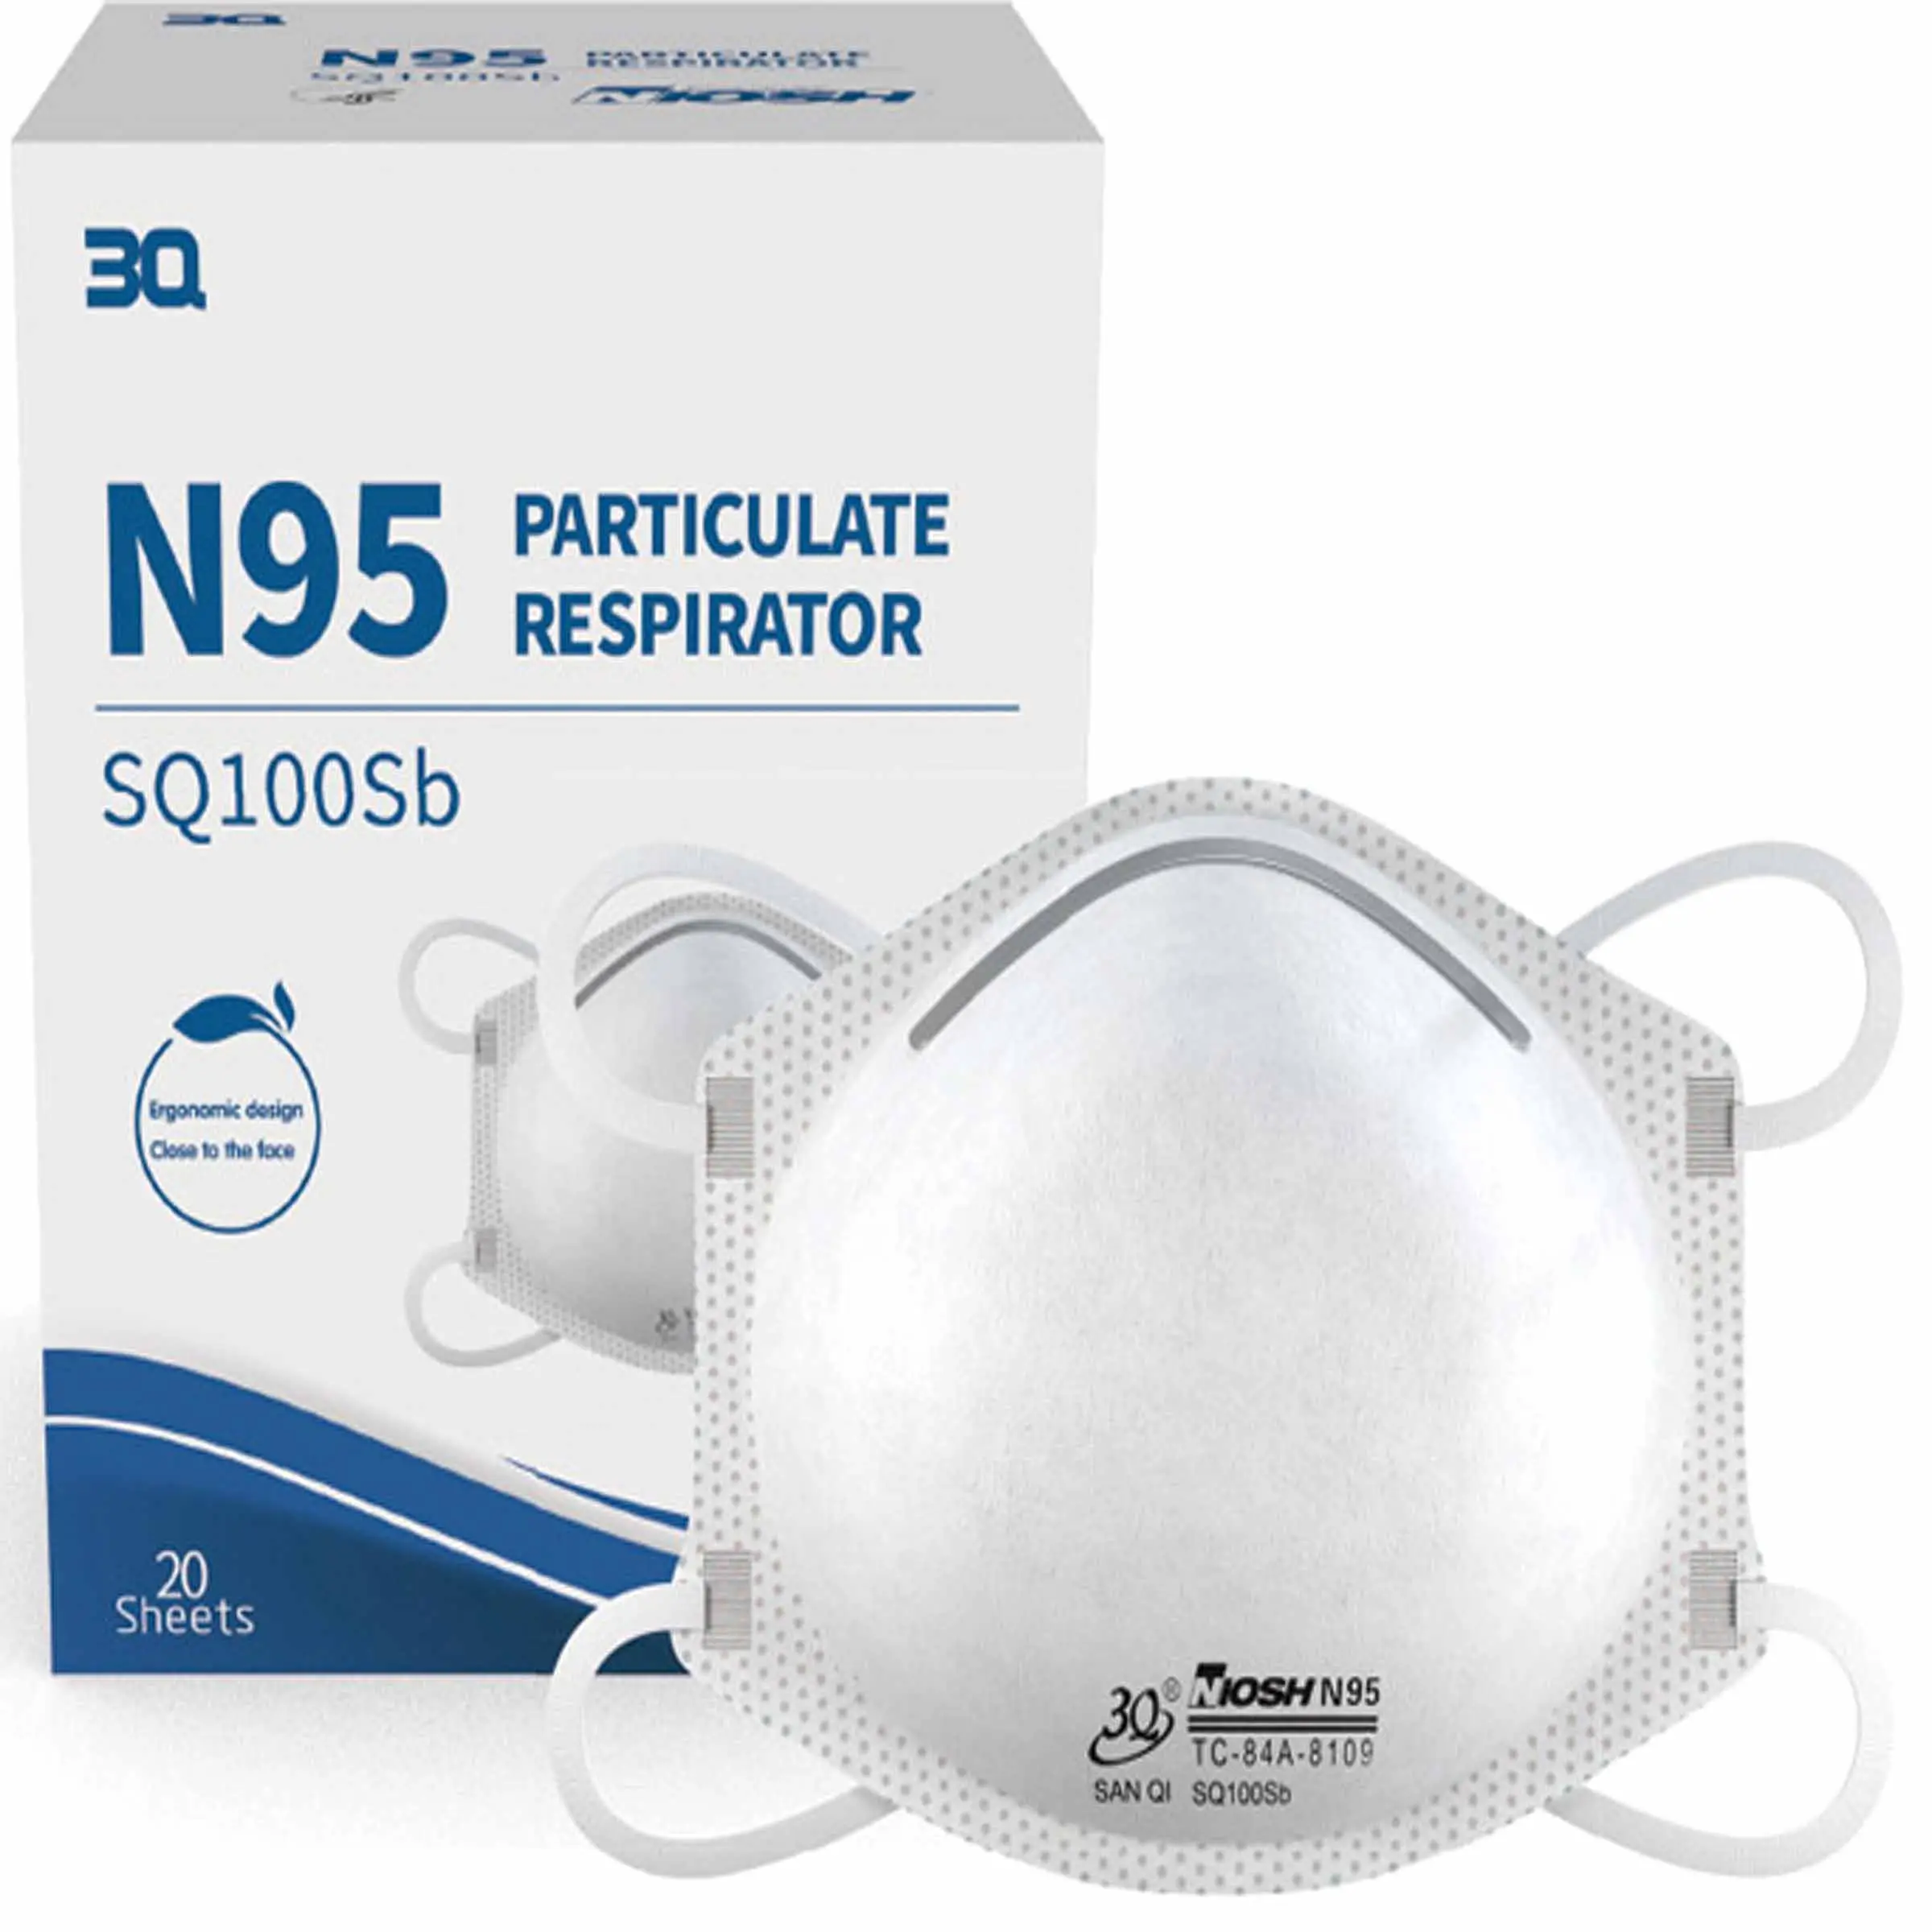 N95 3Q Real N95 Disposable Particulate Respirators Face Masks Ready To Ship